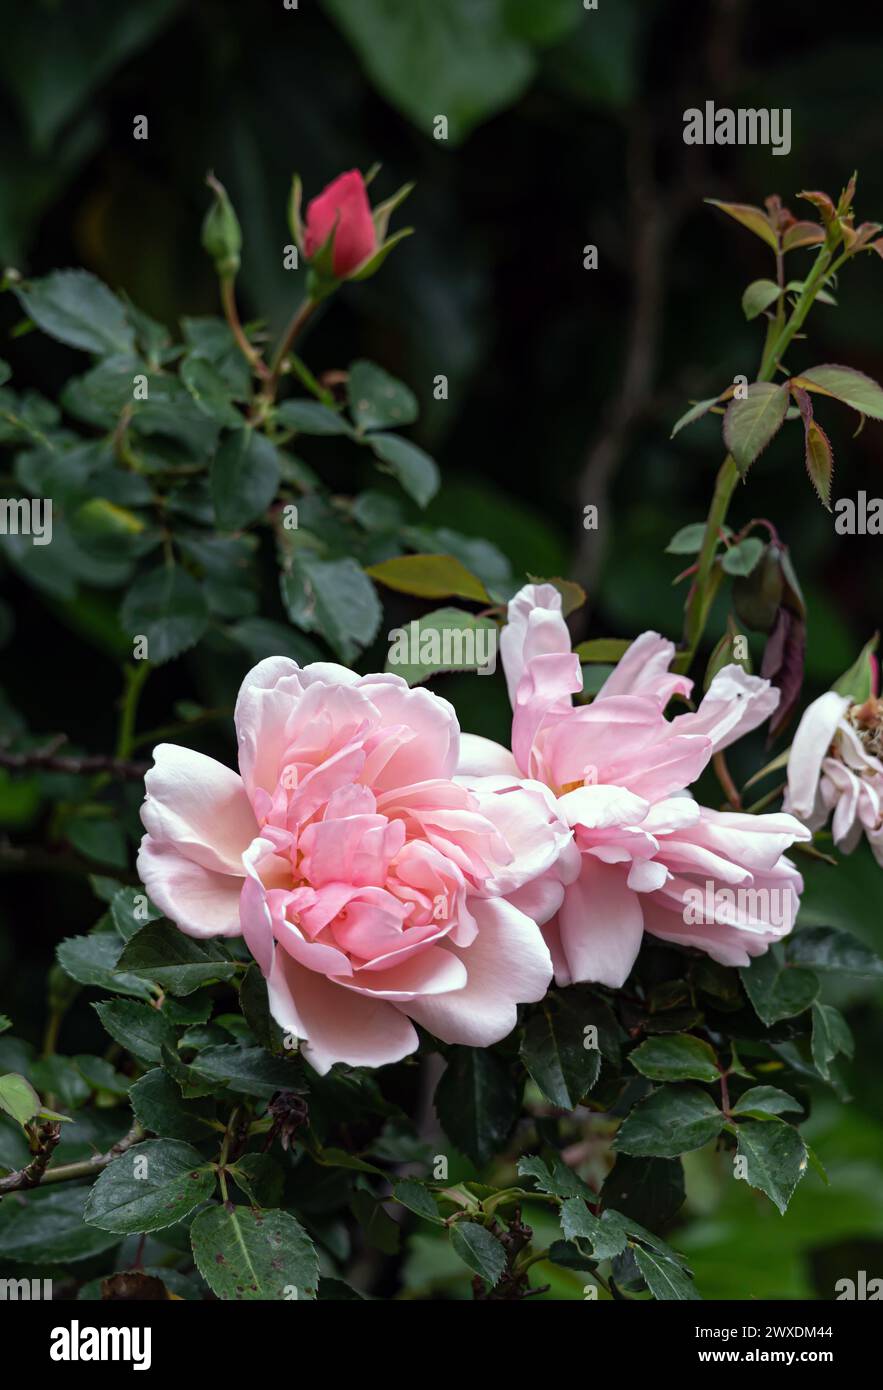 Rosa Felicia Albertine. Two blossoming buds Roses Morgengruss surrounded by green foliage of a bush, in the garden. Salmon pink color flowers, close up botanical background Stock Photo